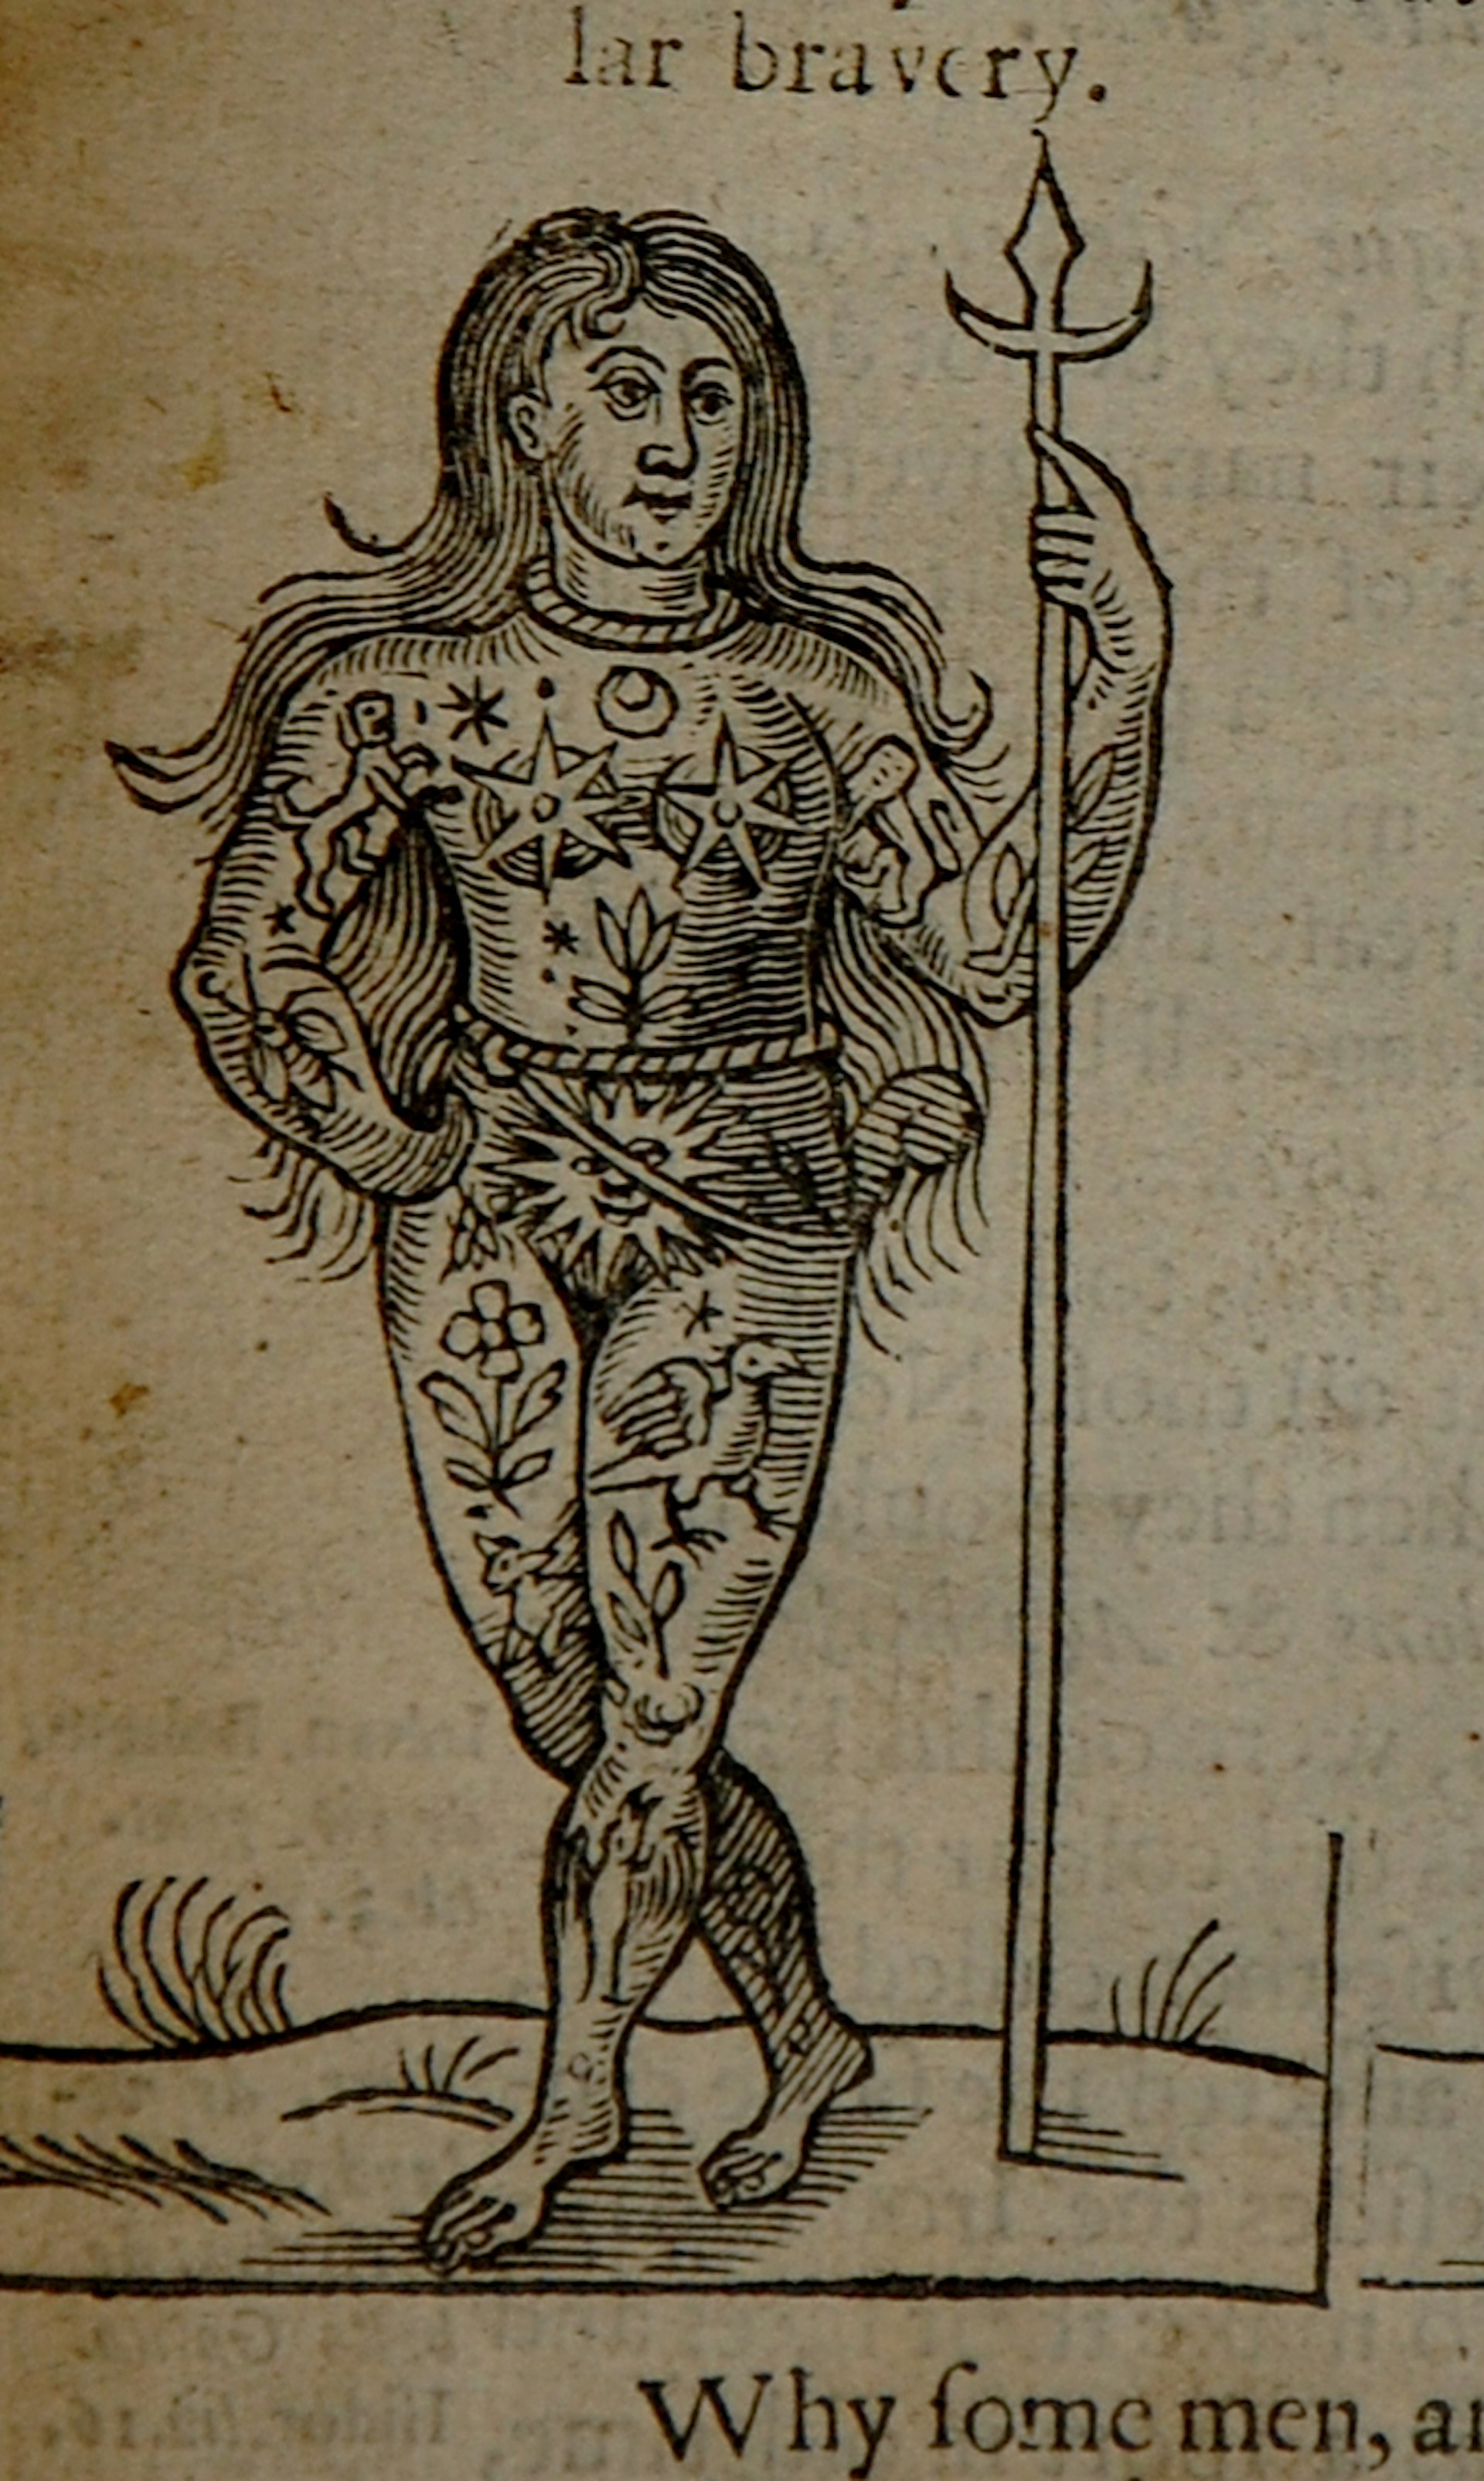 Man transform'd by John Bulwer, 1653 Image courtesy of Willie Robinson_Bulwer 1